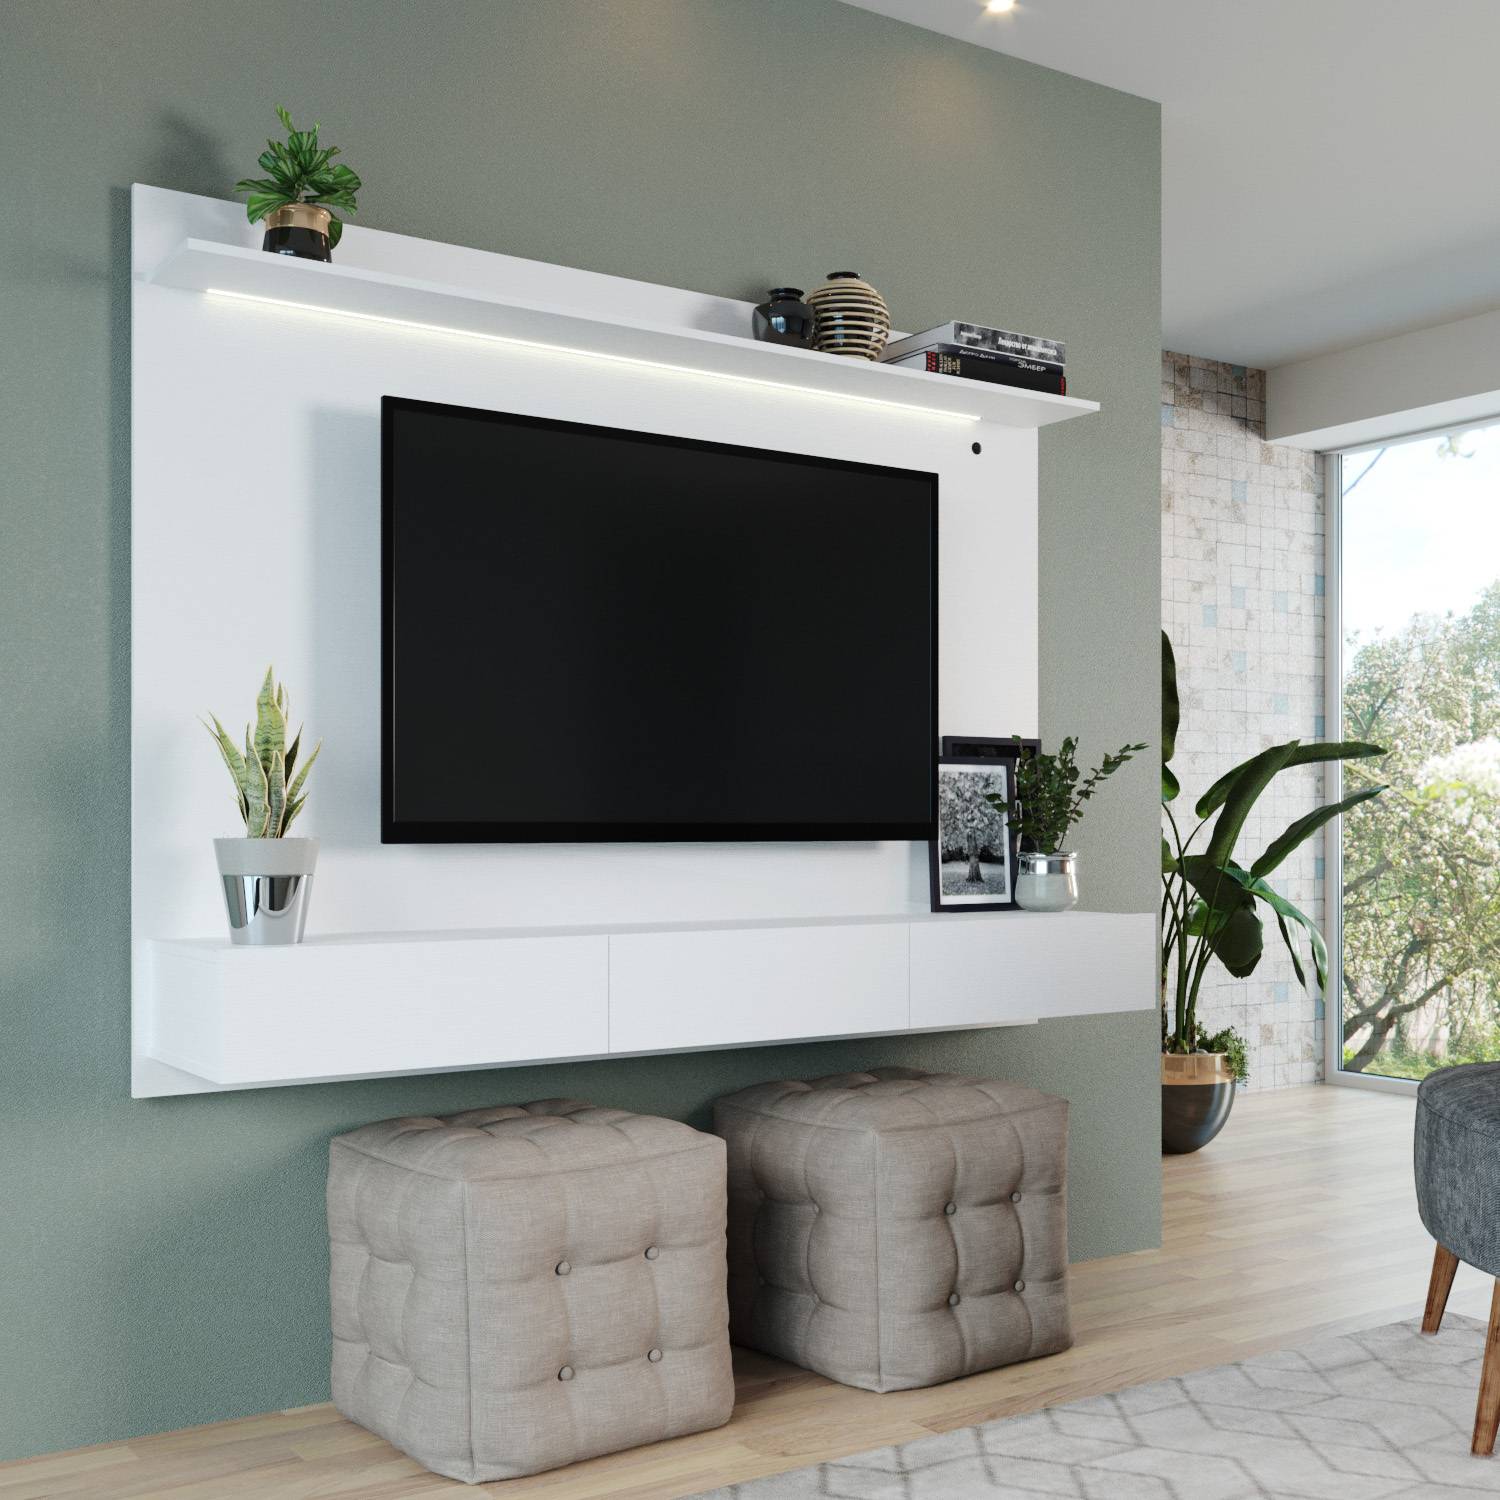 Forkludret Partina City Charmerende Naomi Home Bliss Wall-Mounted Entertainment Center - Naomi Home